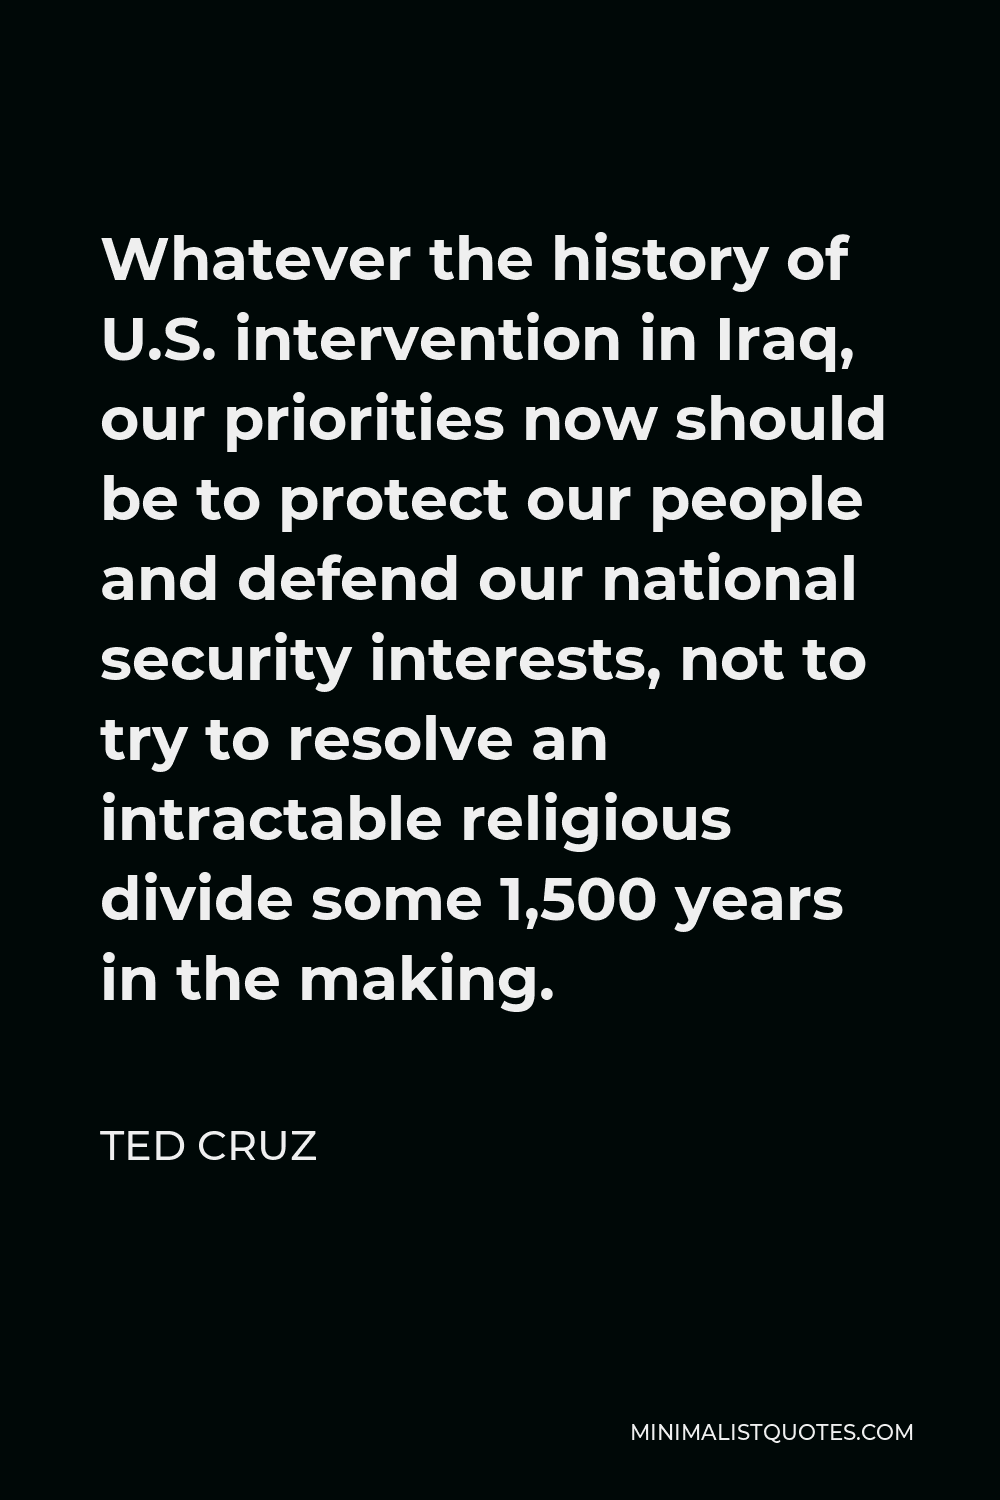 Ted Cruz Quote - Whatever the history of U.S. intervention in Iraq, our priorities now should be to protect our people and defend our national security interests, not to try to resolve an intractable religious divide some 1,500 years in the making.